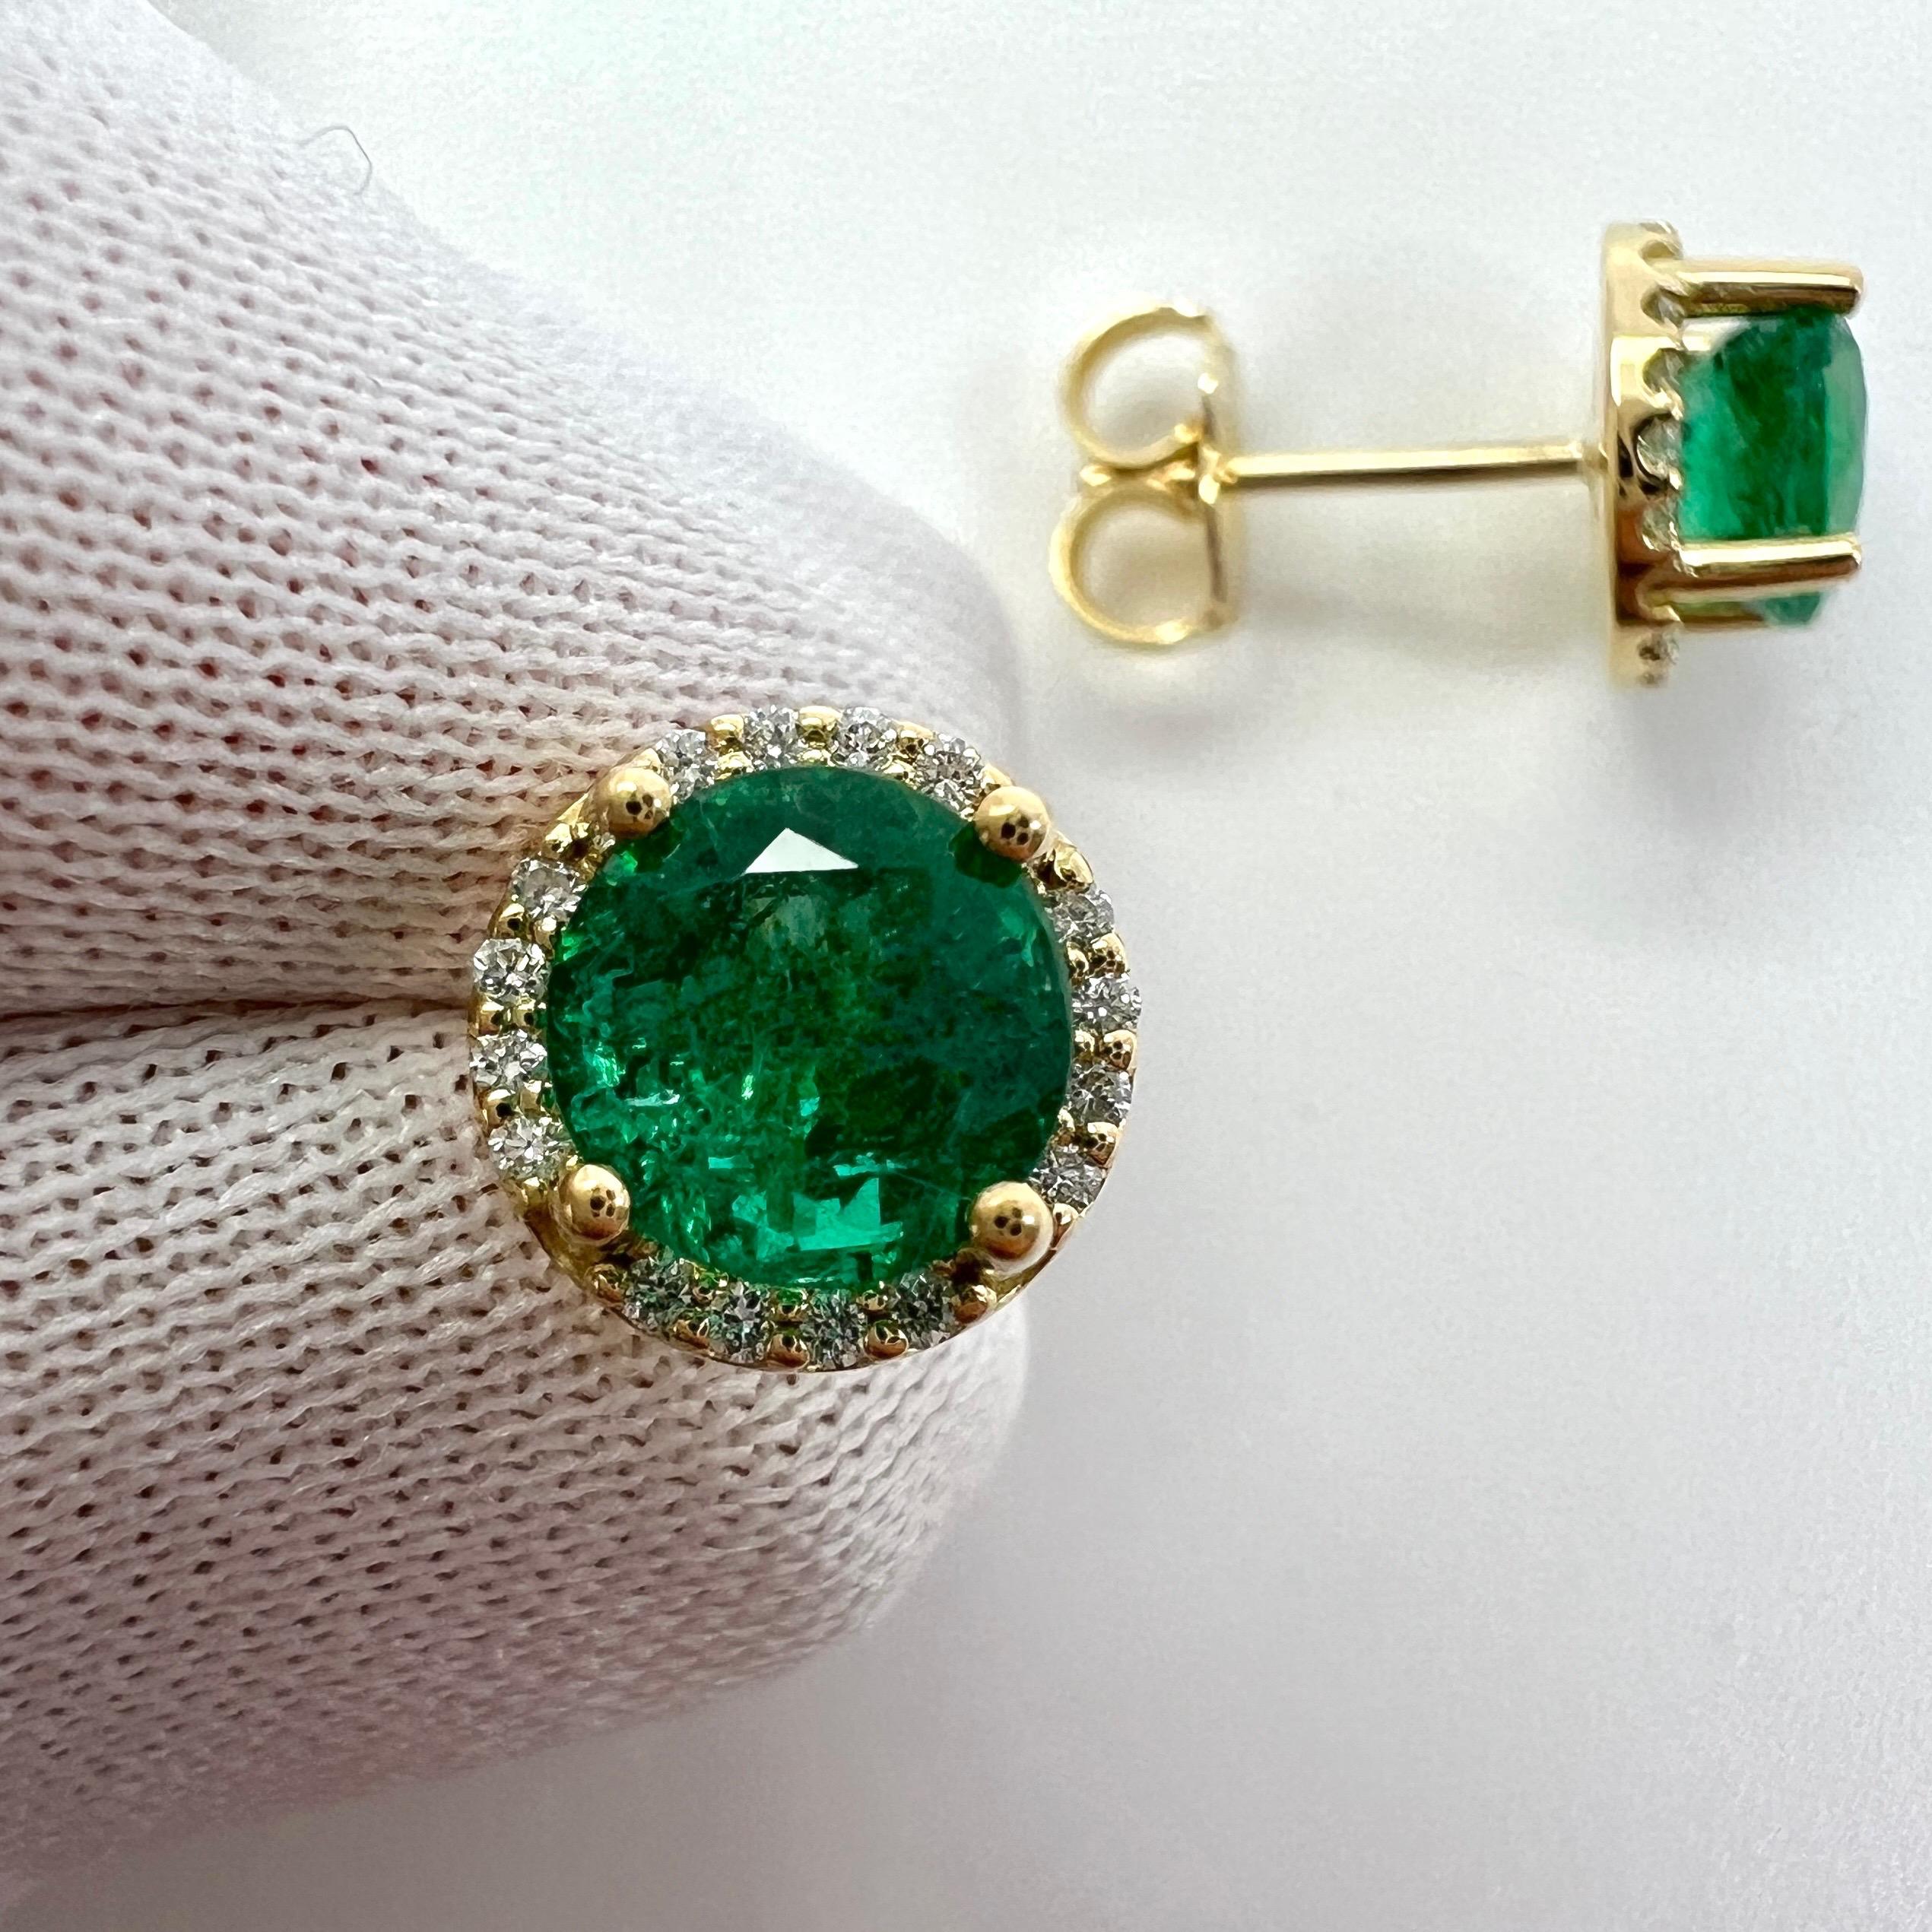 Vivid Green Round Cut Emerald And Diamond 18k Yellow Gold Halo Earring Studs.

These earrings feature two natural emeralds with a vivid green colour and an excellent round cut measuring 6mm. 1.59 total carat of emeralds.

These emeralds are a